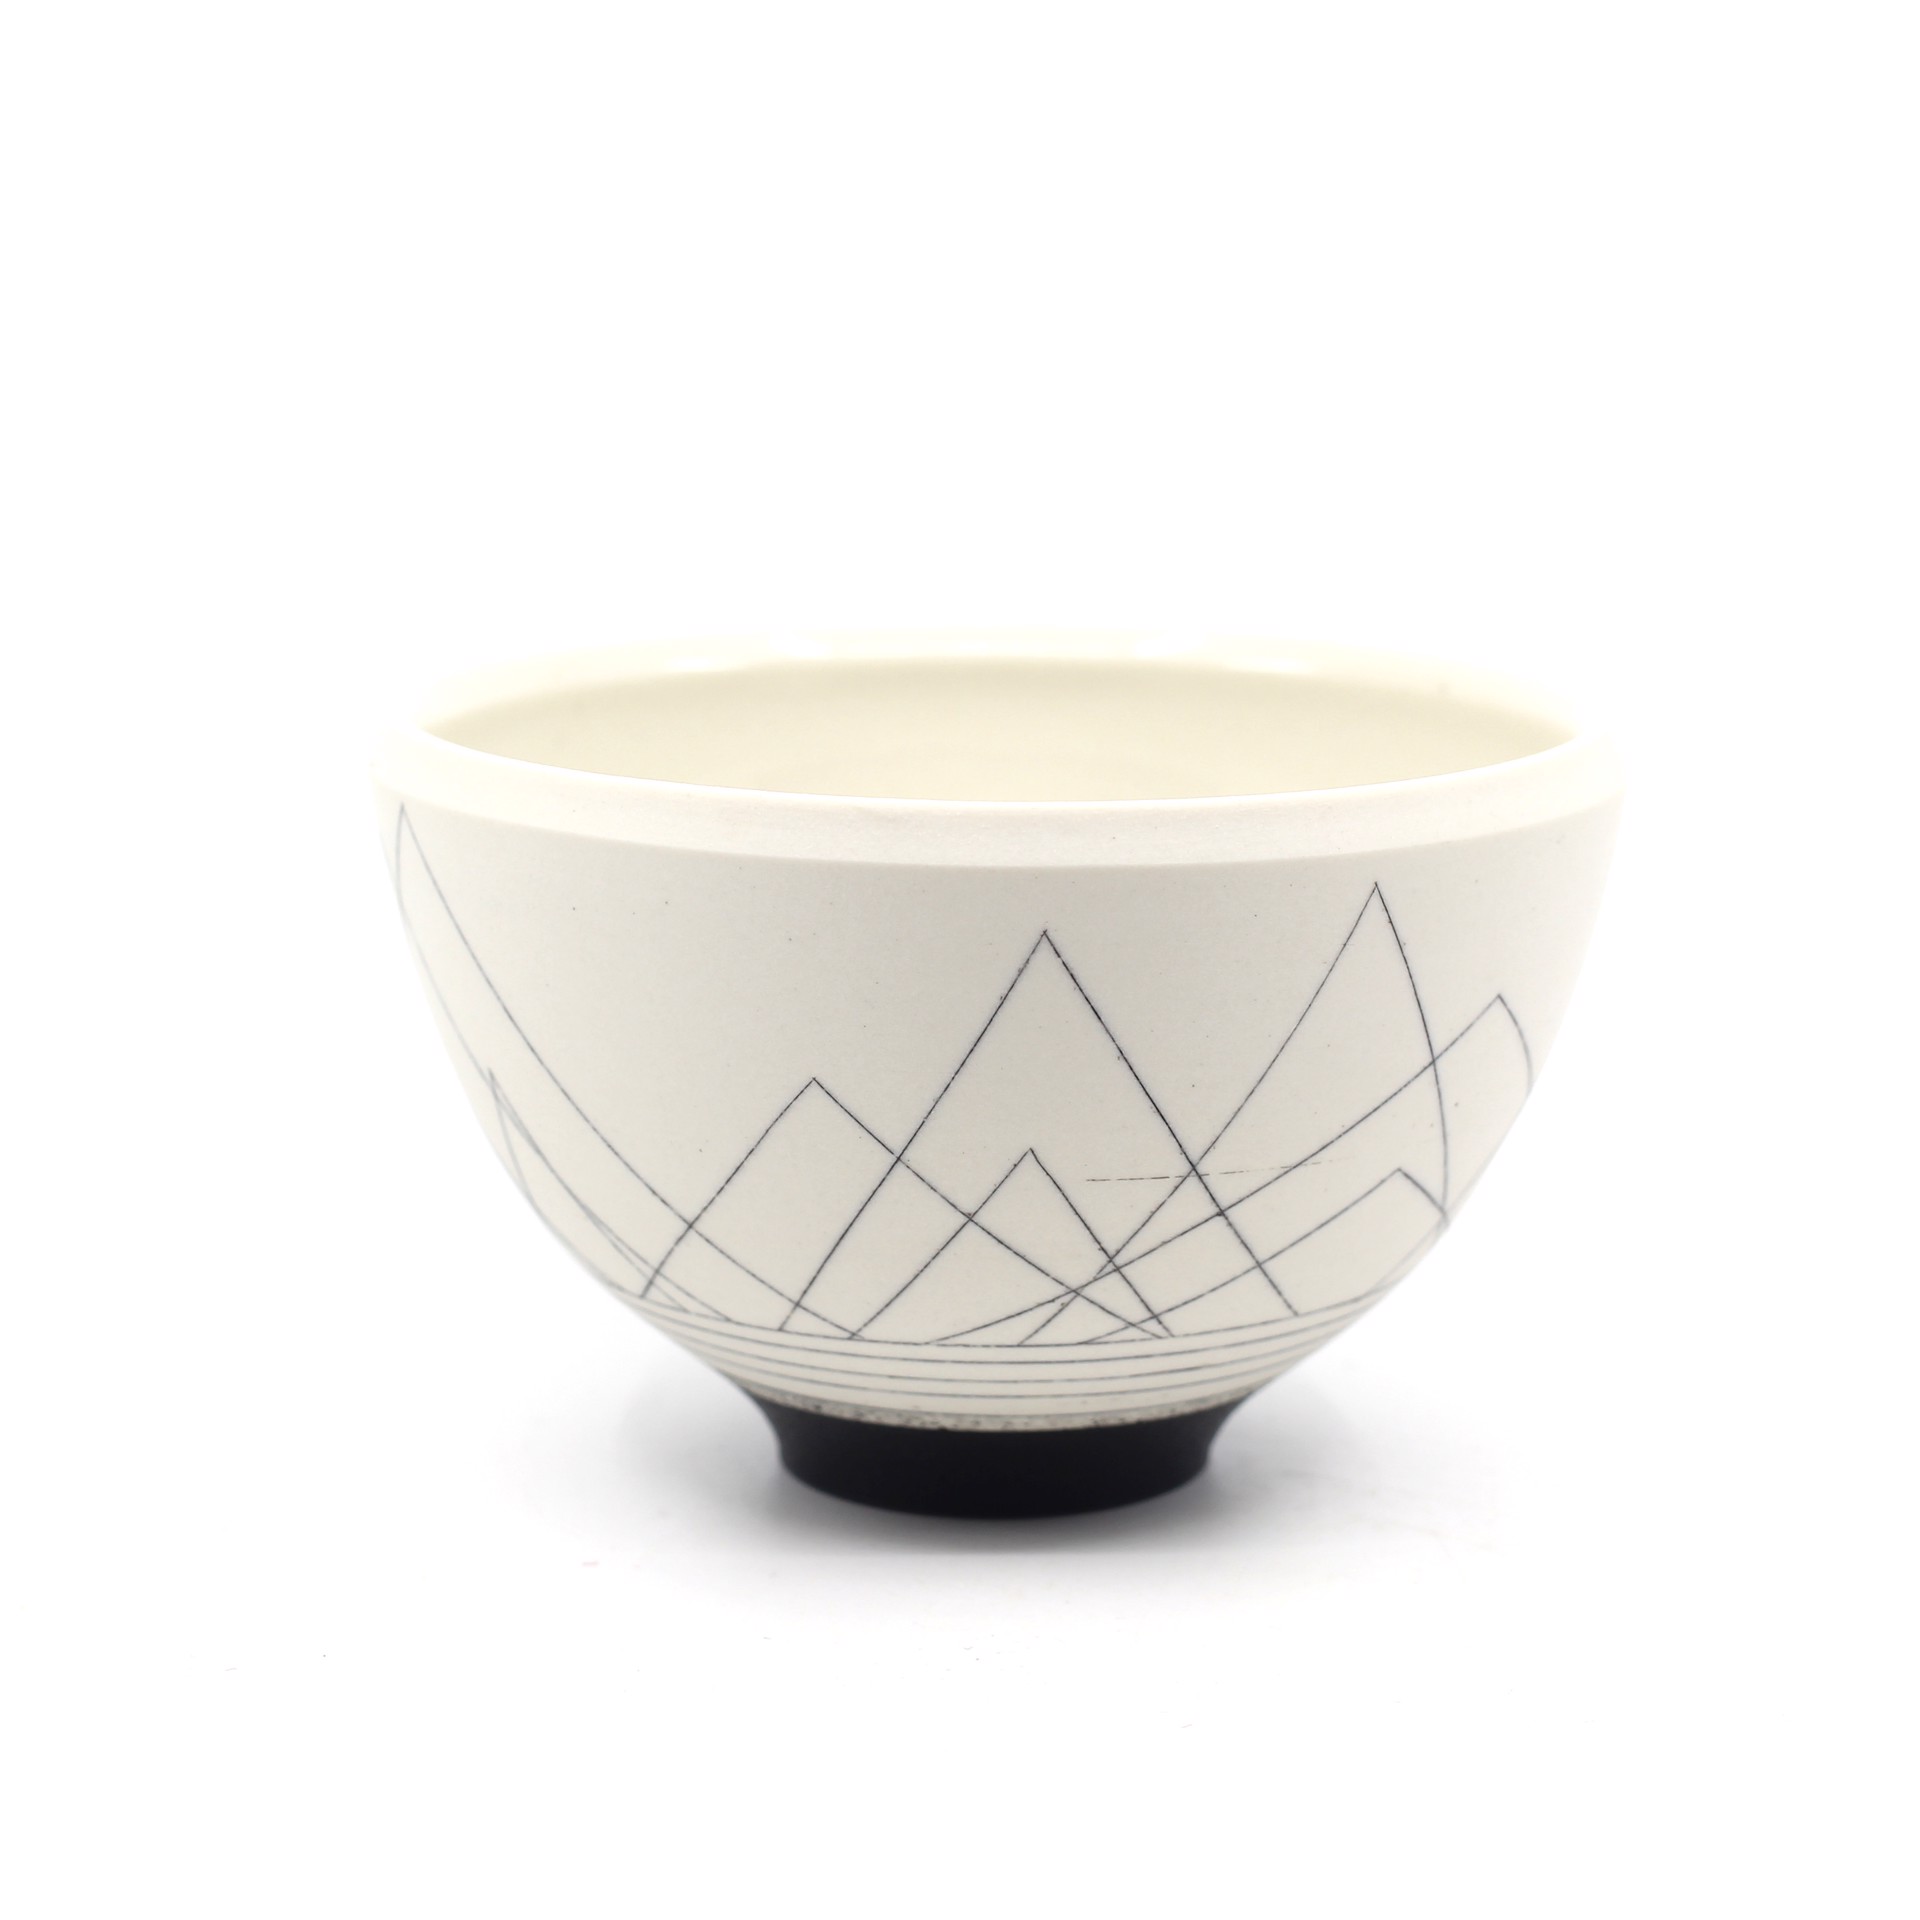 Mountain Small Bowl by Bianka Groves